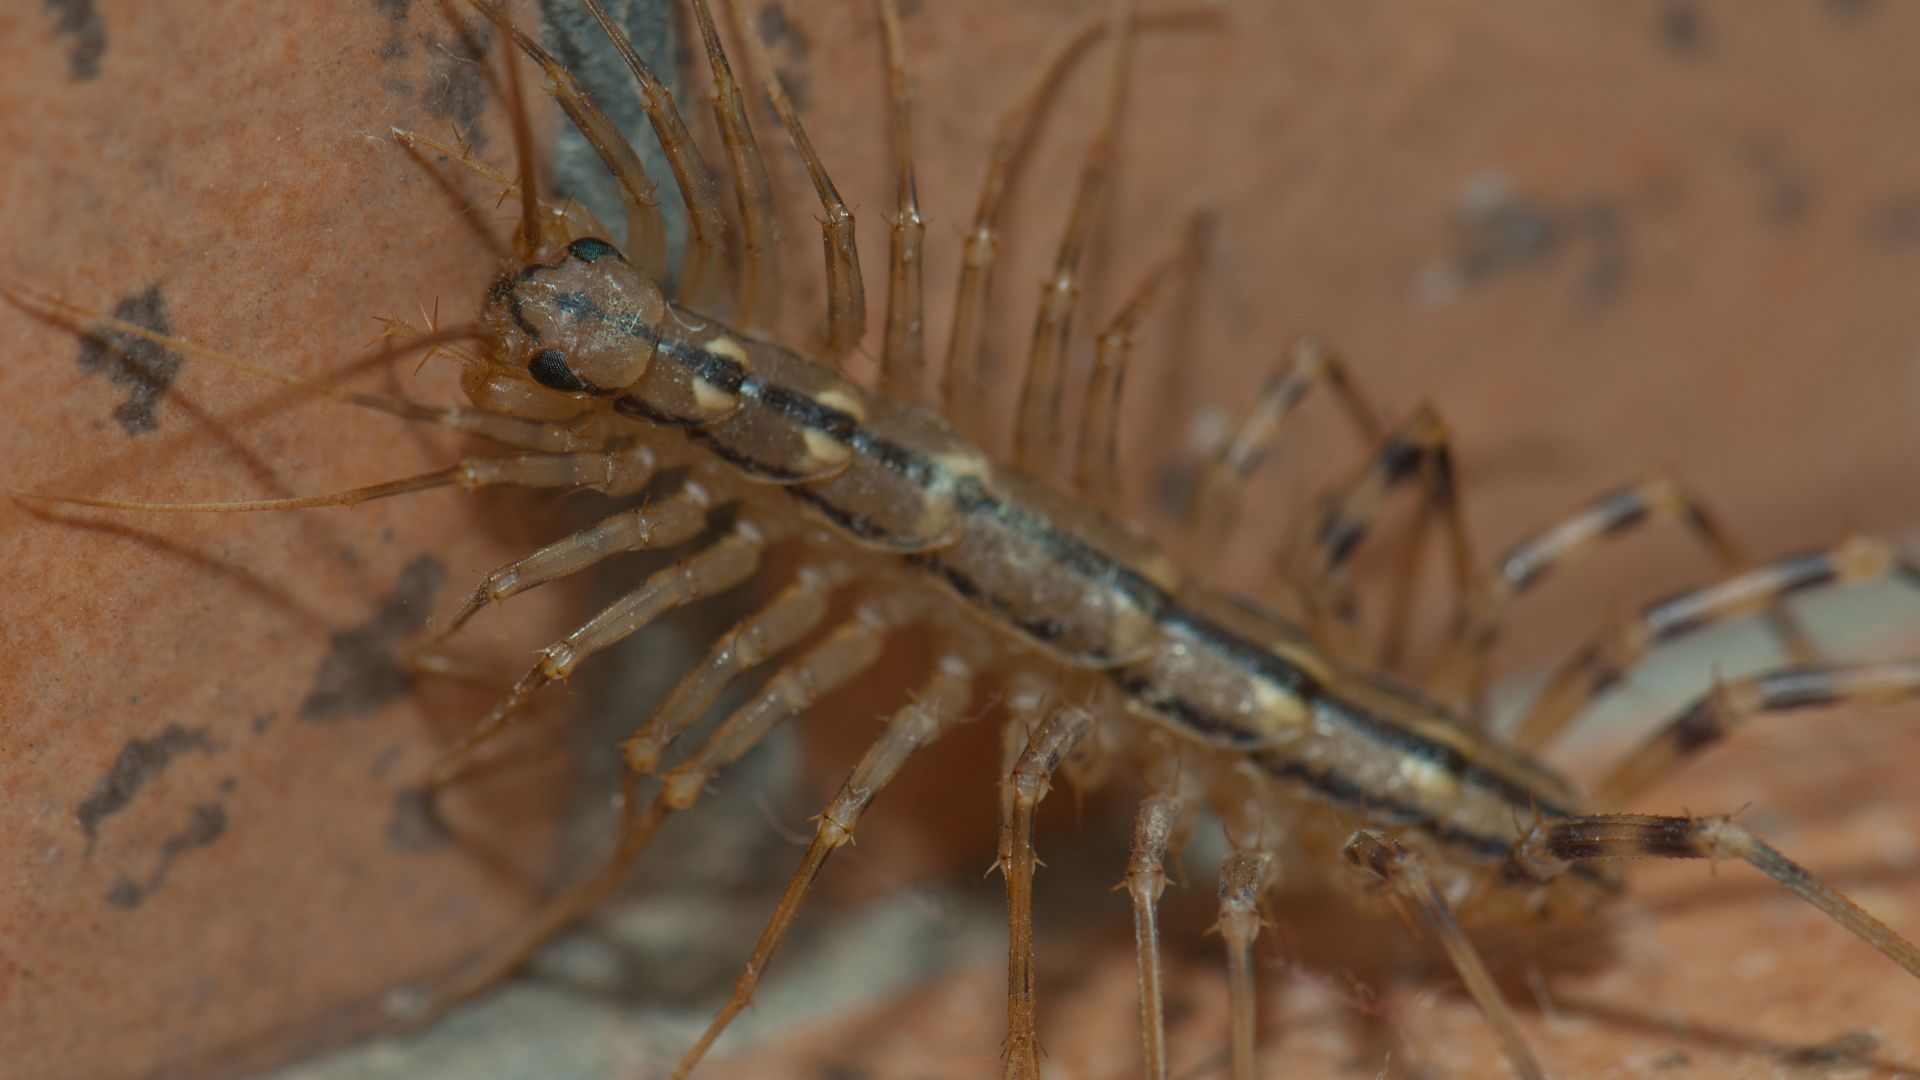 An image of a centipede crawling on a red stone wall inside a home.